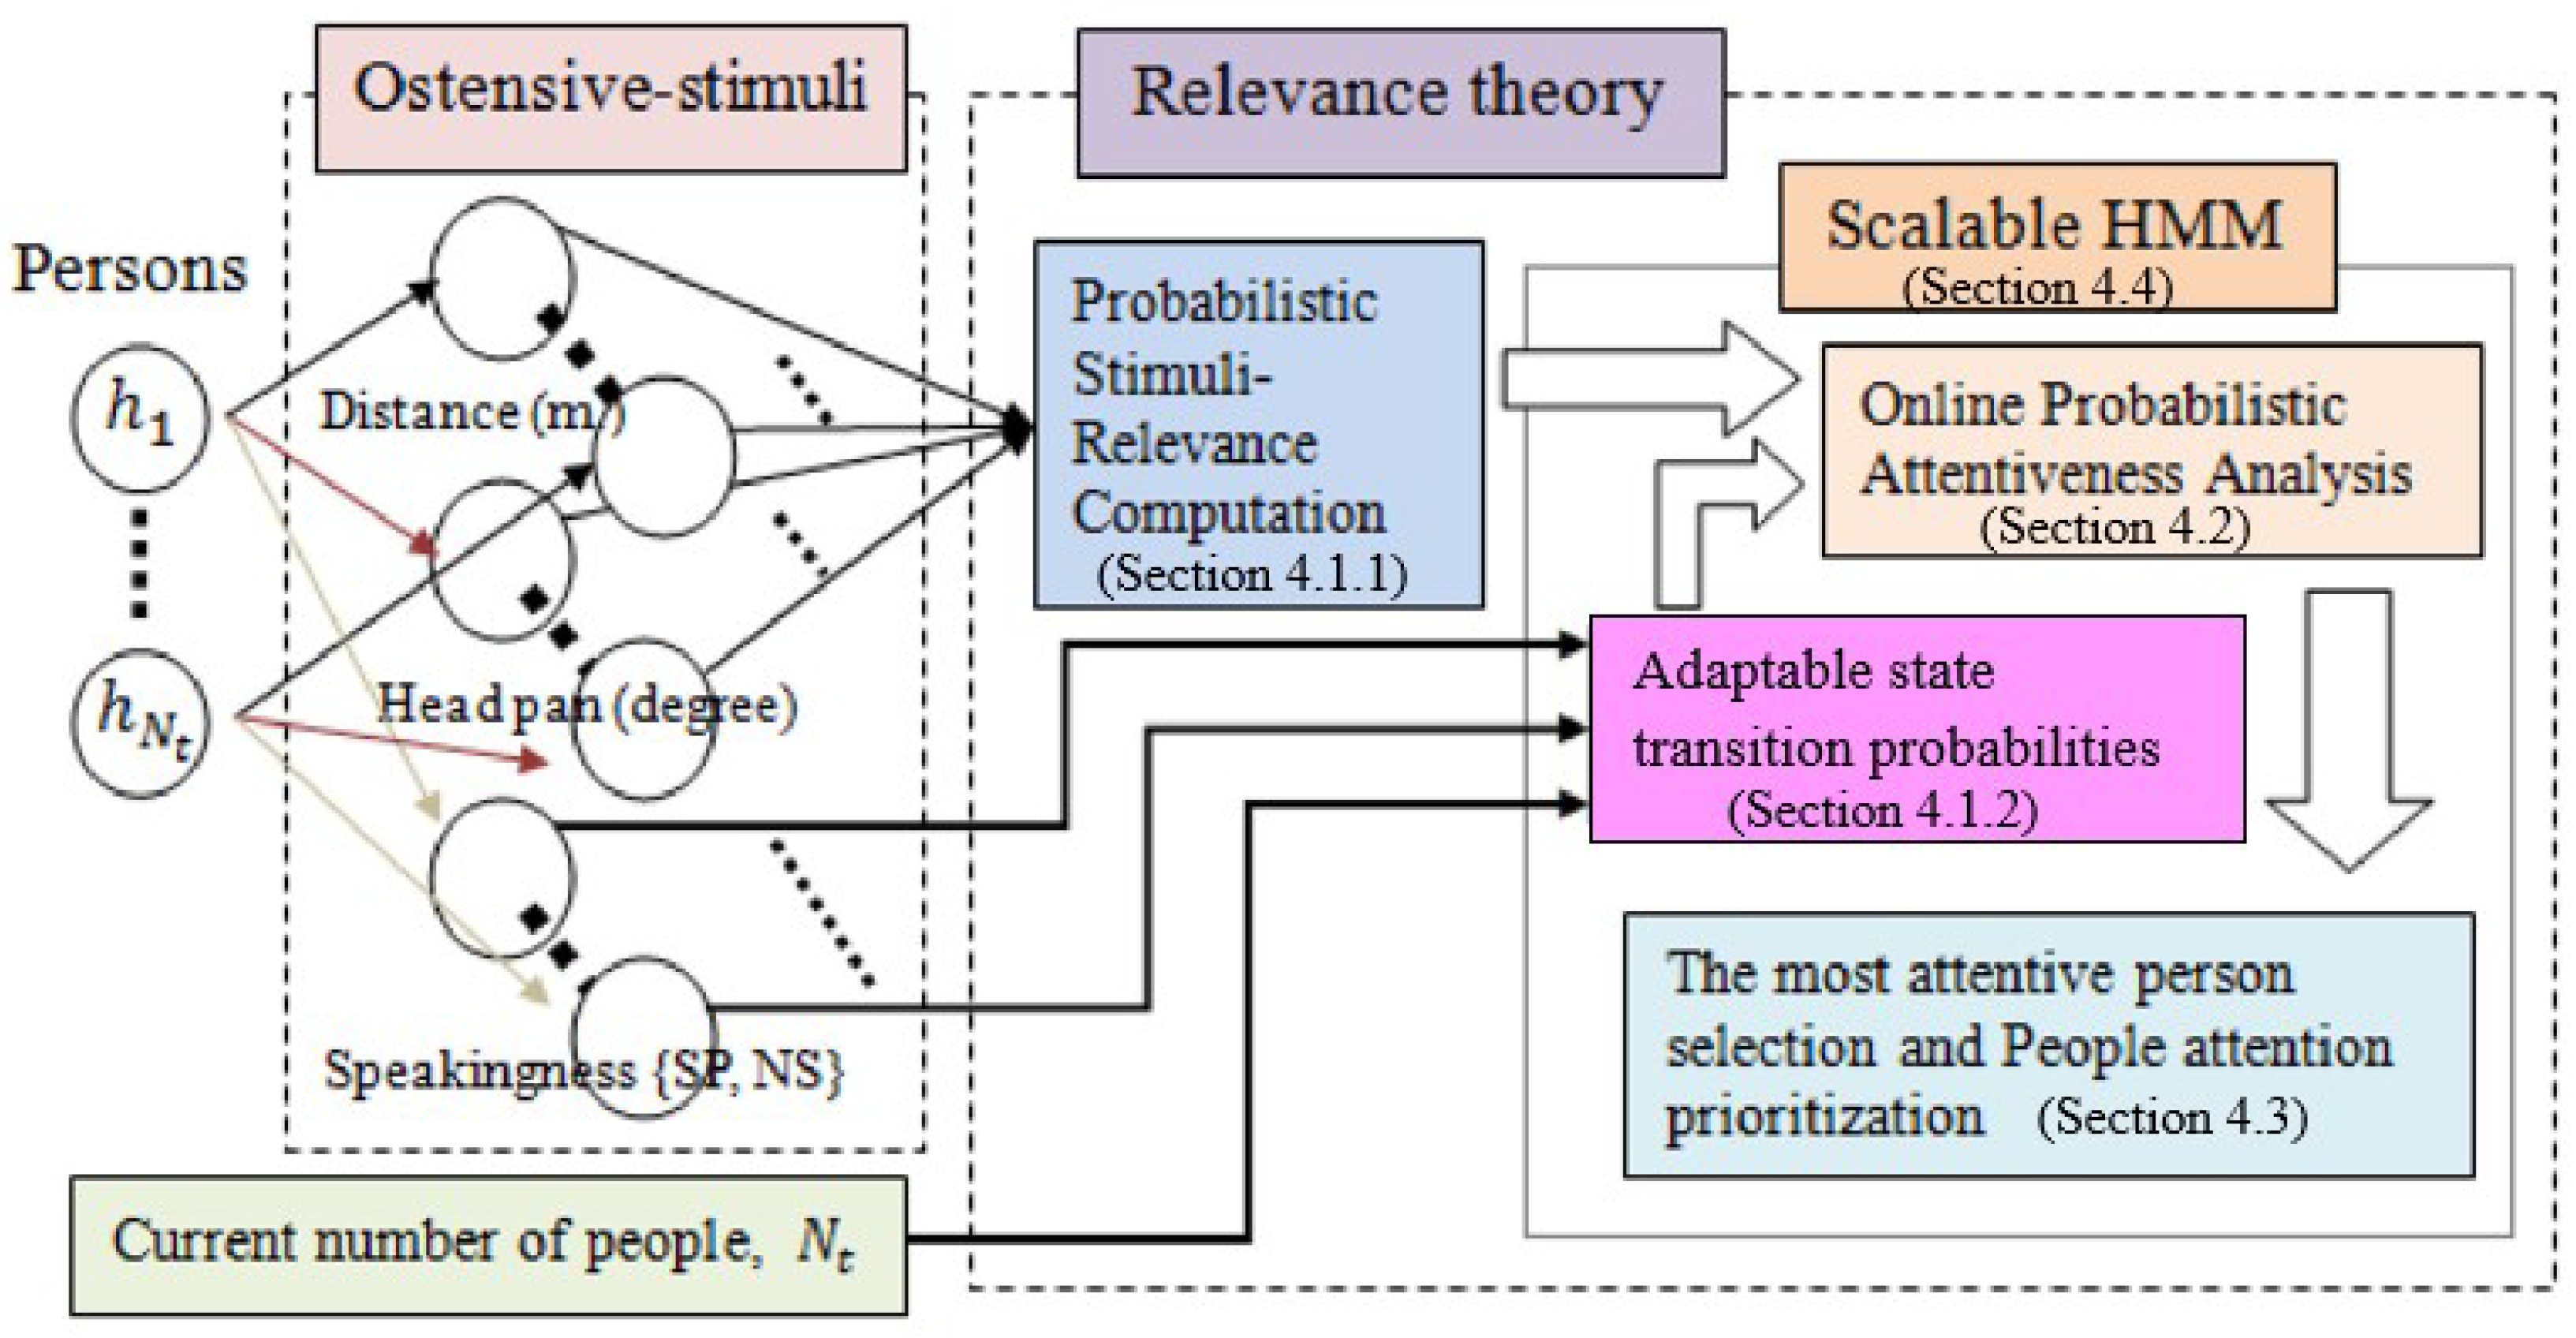 Relevance Theory. Attention model